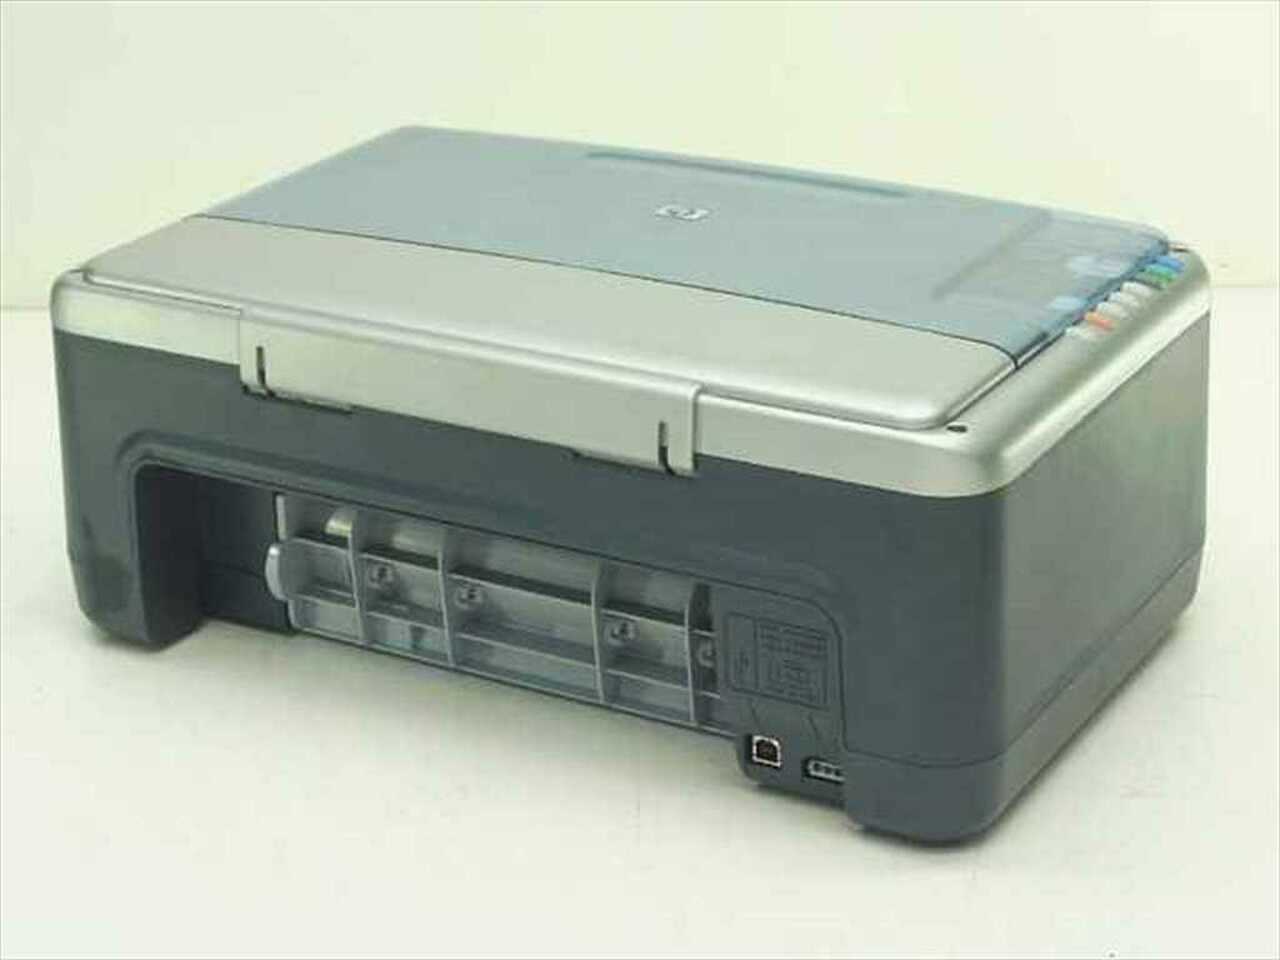 hp psc 1350 software